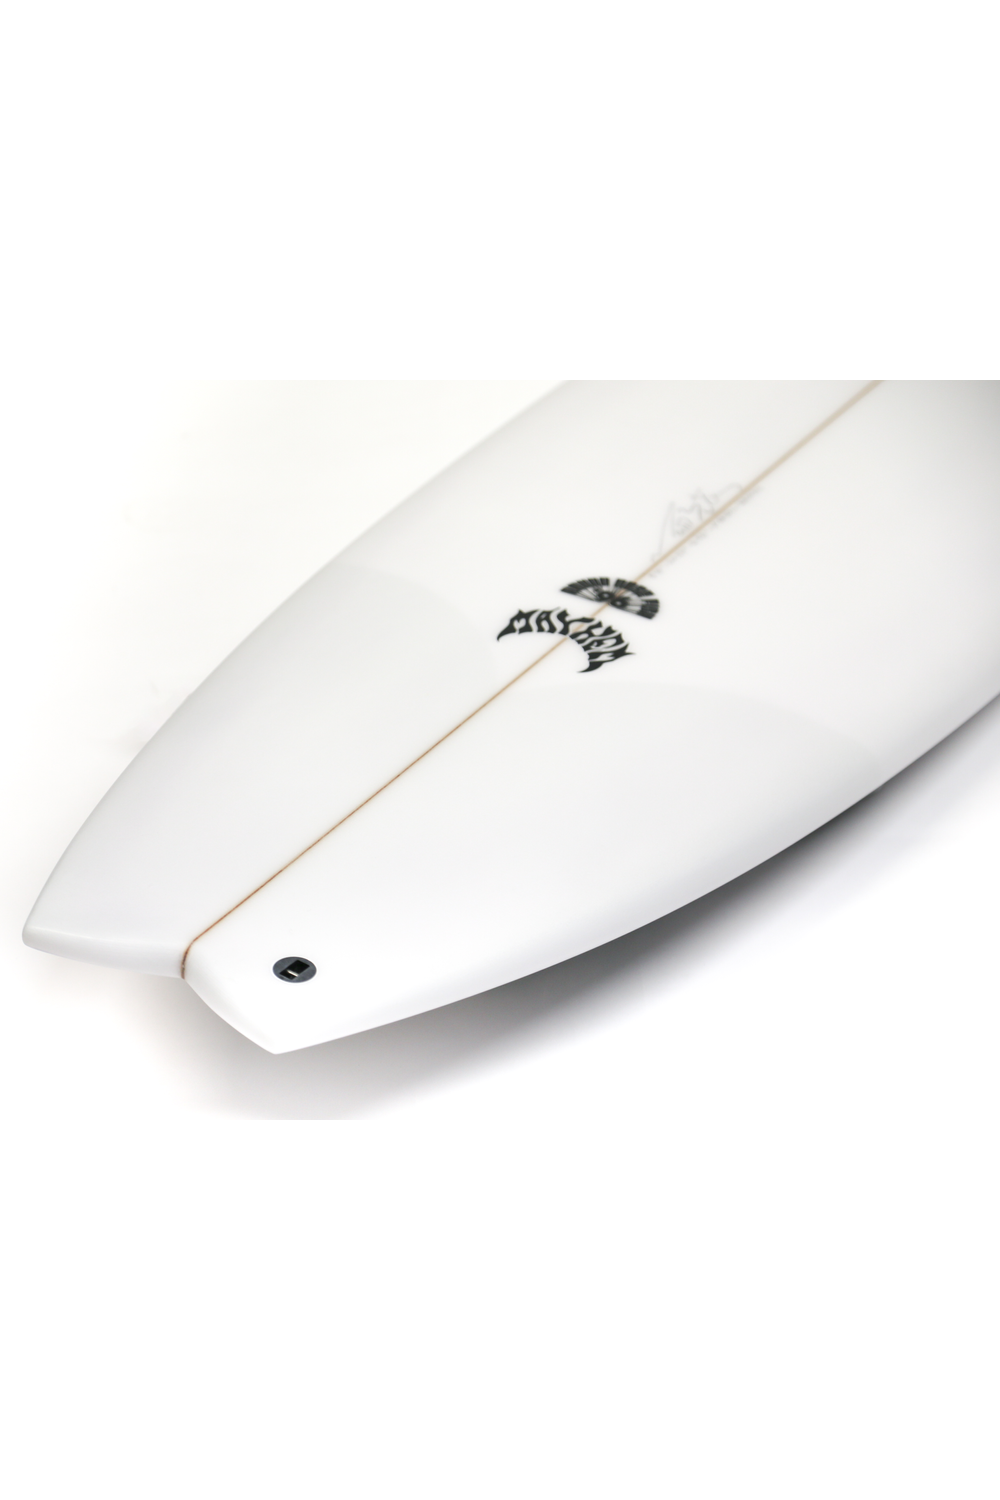 Lost Round Nose Fish 96, 6'1 Surfboard 39.50L PU Futures 3 Fins